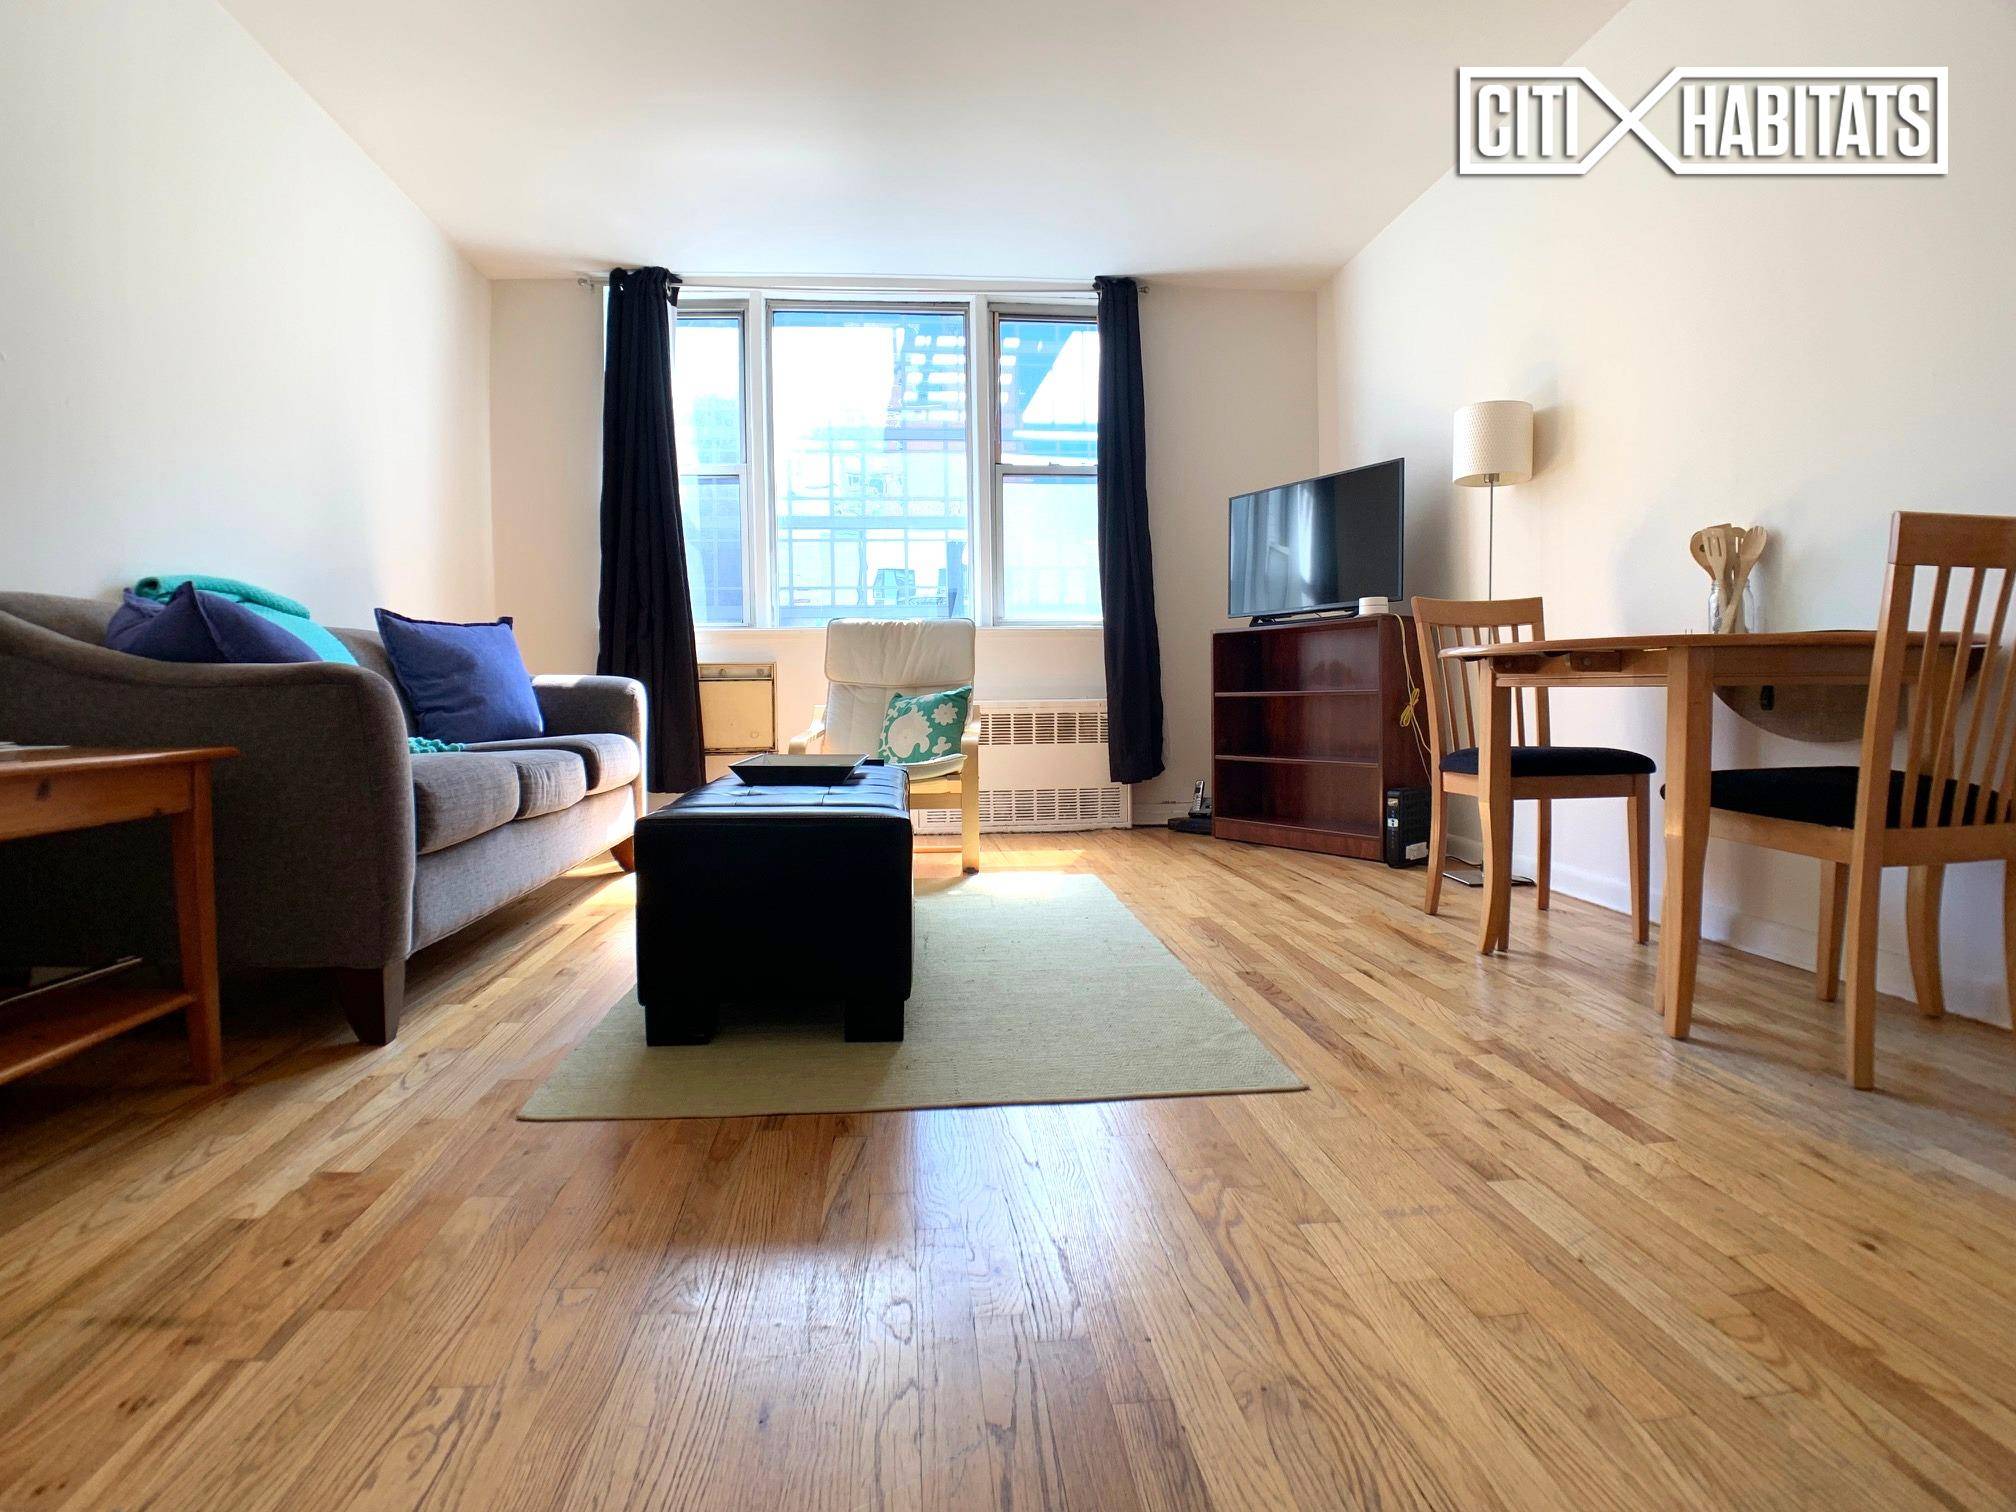 NEW EXCLUSIVE ! SPECTACULAR MASSIVE three bedroom two bathroom apartment located in the heart of Upper East !